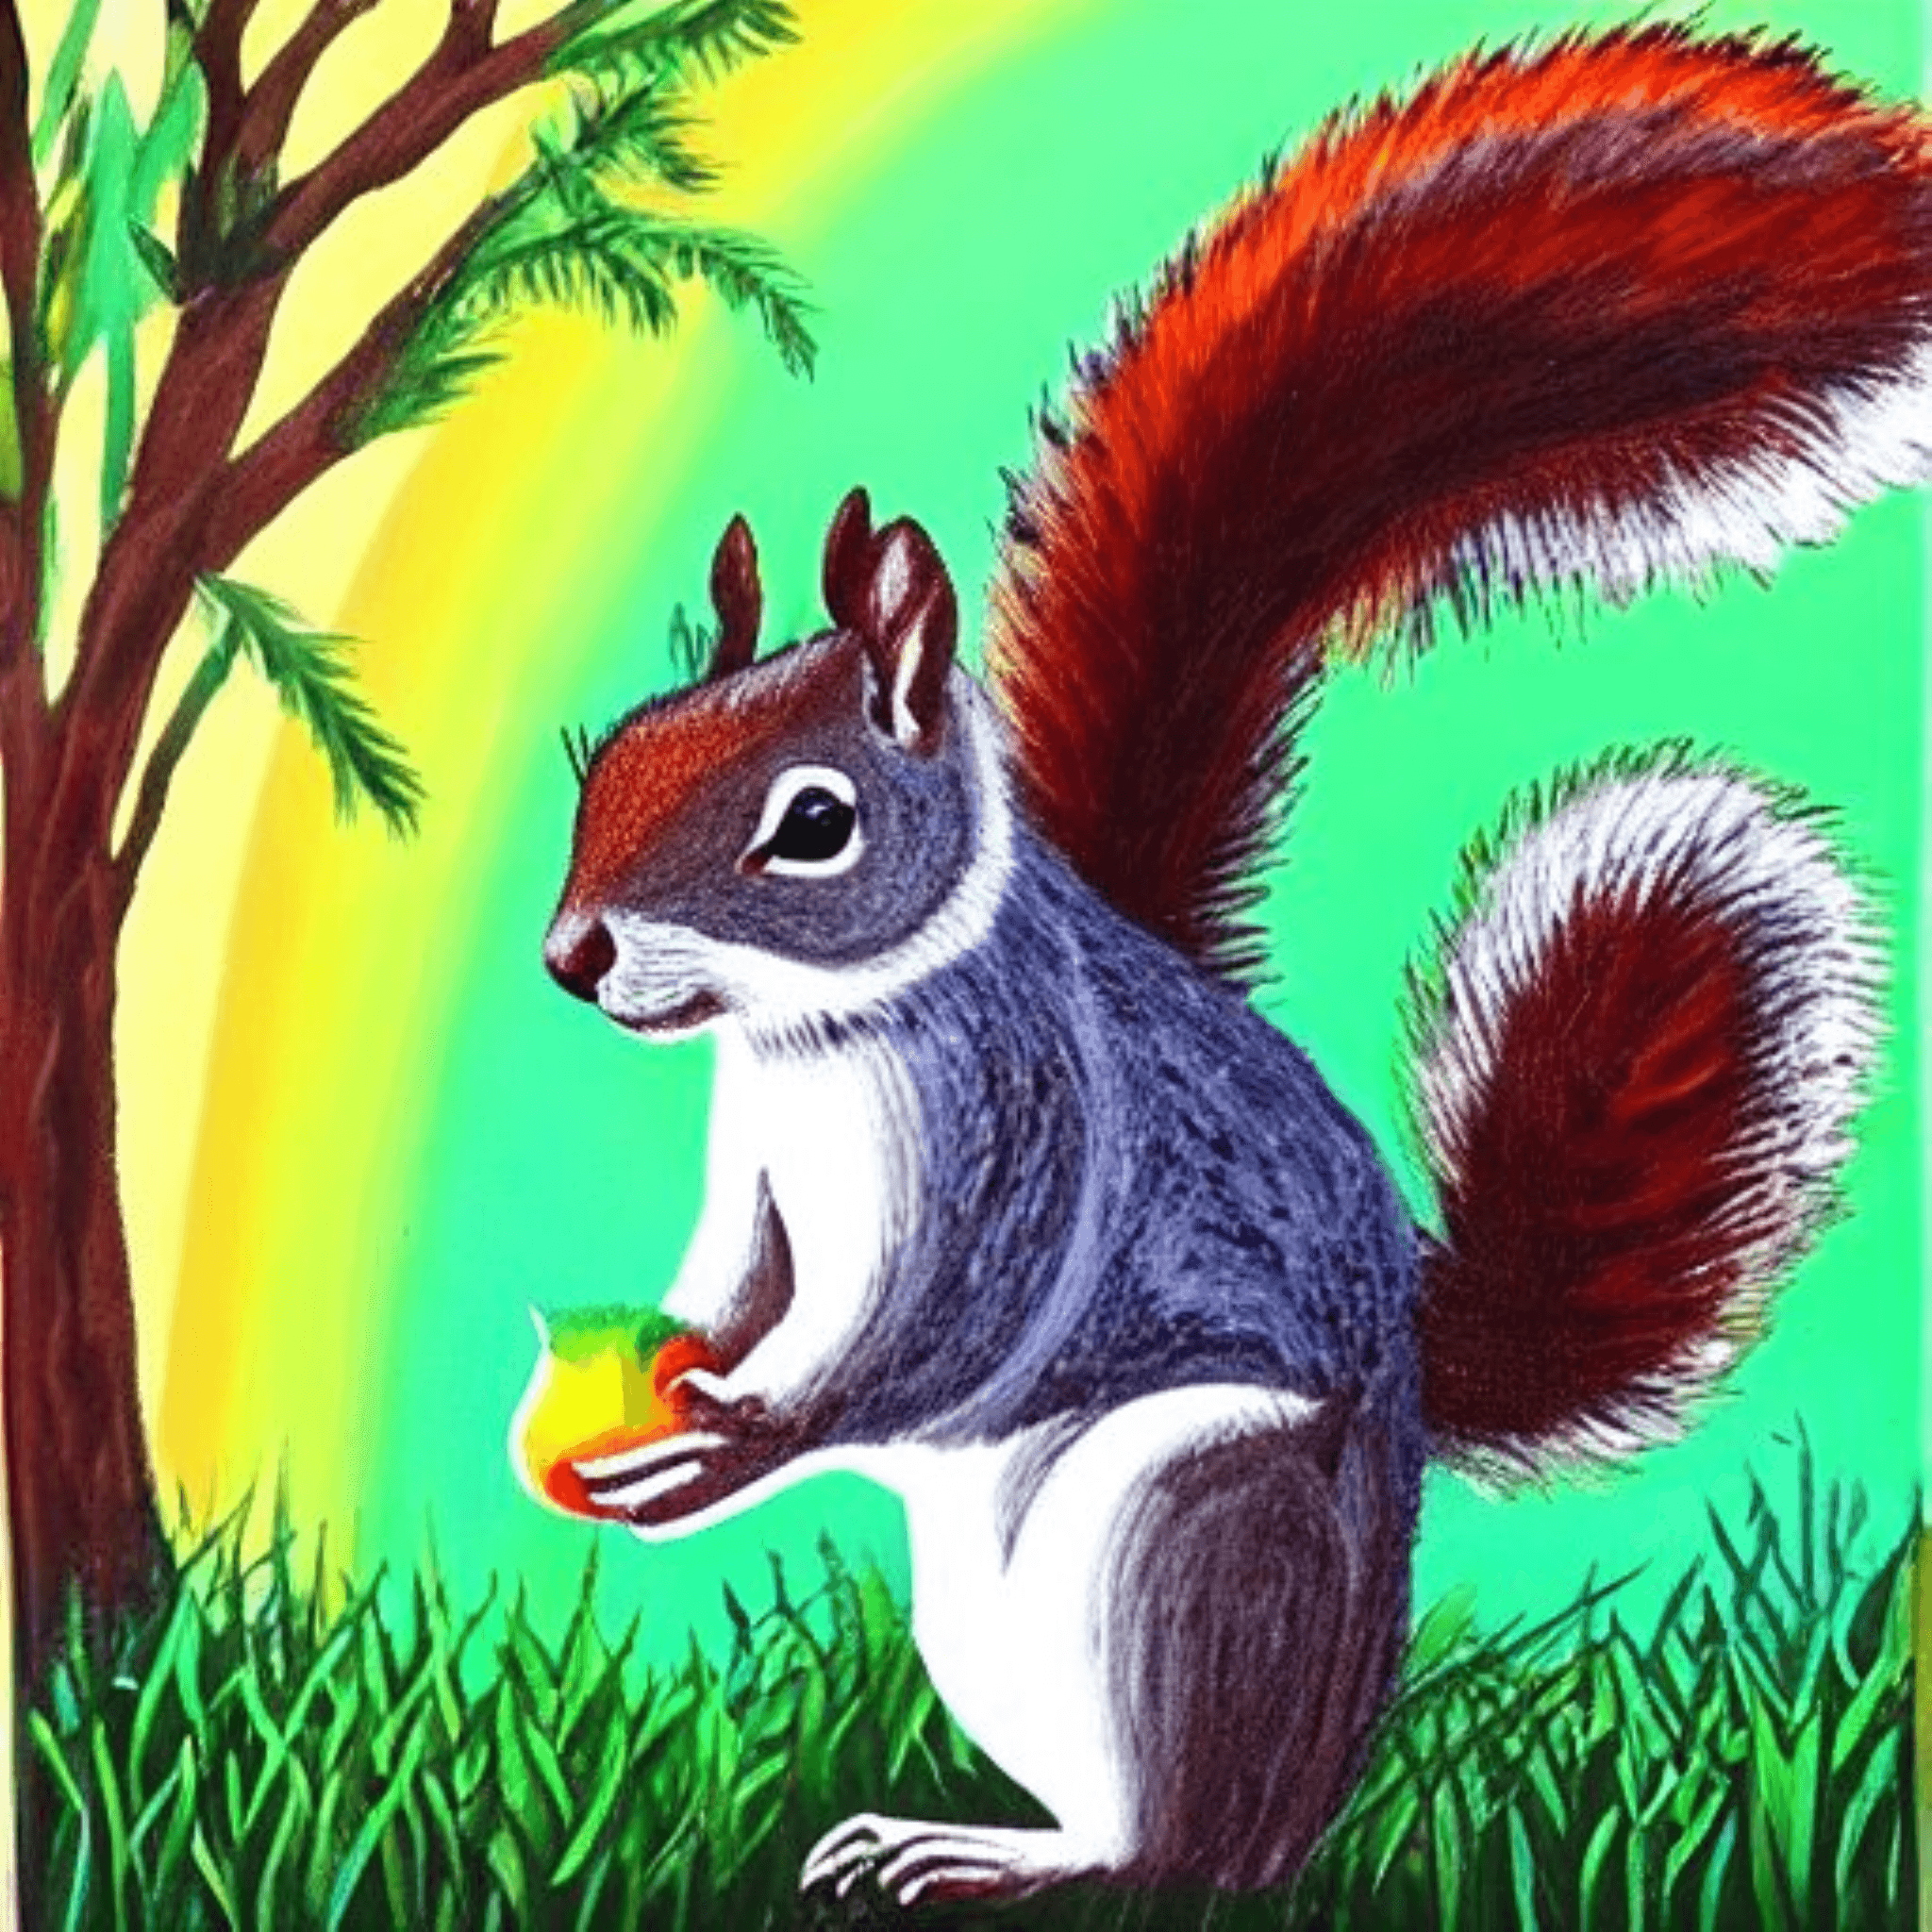 Art Acrylic Painting of a Squirrel